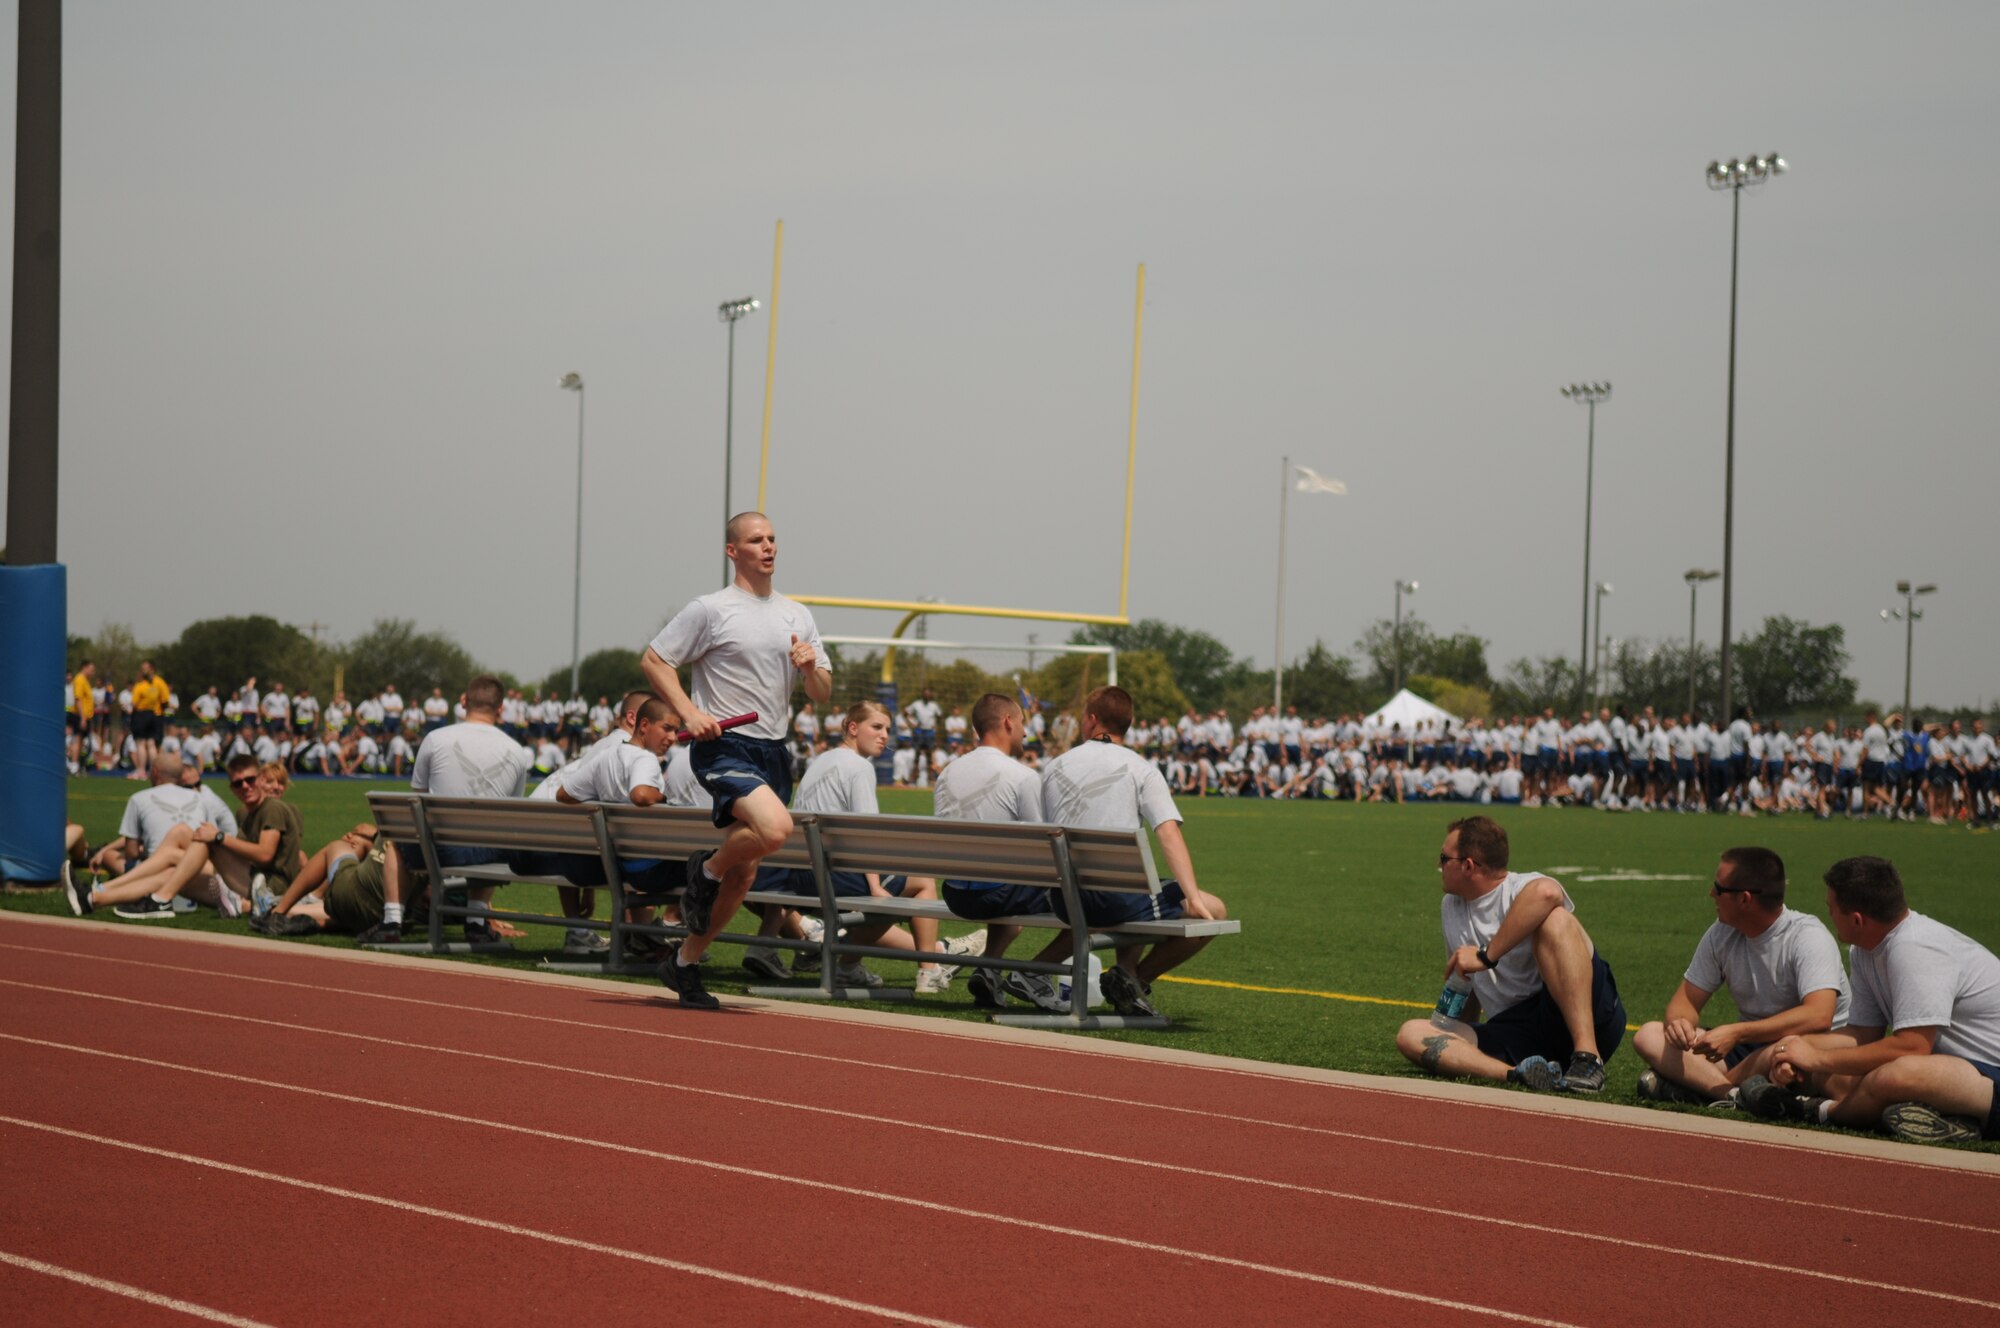 GOODFELLOW AIR FORCE BASE, Texas – Capt. Drew Werner, Deputy Commander of the 17th Force Support Squadron, participates in a one mile relay race May 27. Team Goodfellow devoted the day to safety and sports to kick off the 101 critical days of summer. (U.S. Air Force photo/Staff Sgt. Heather L Rodgers)